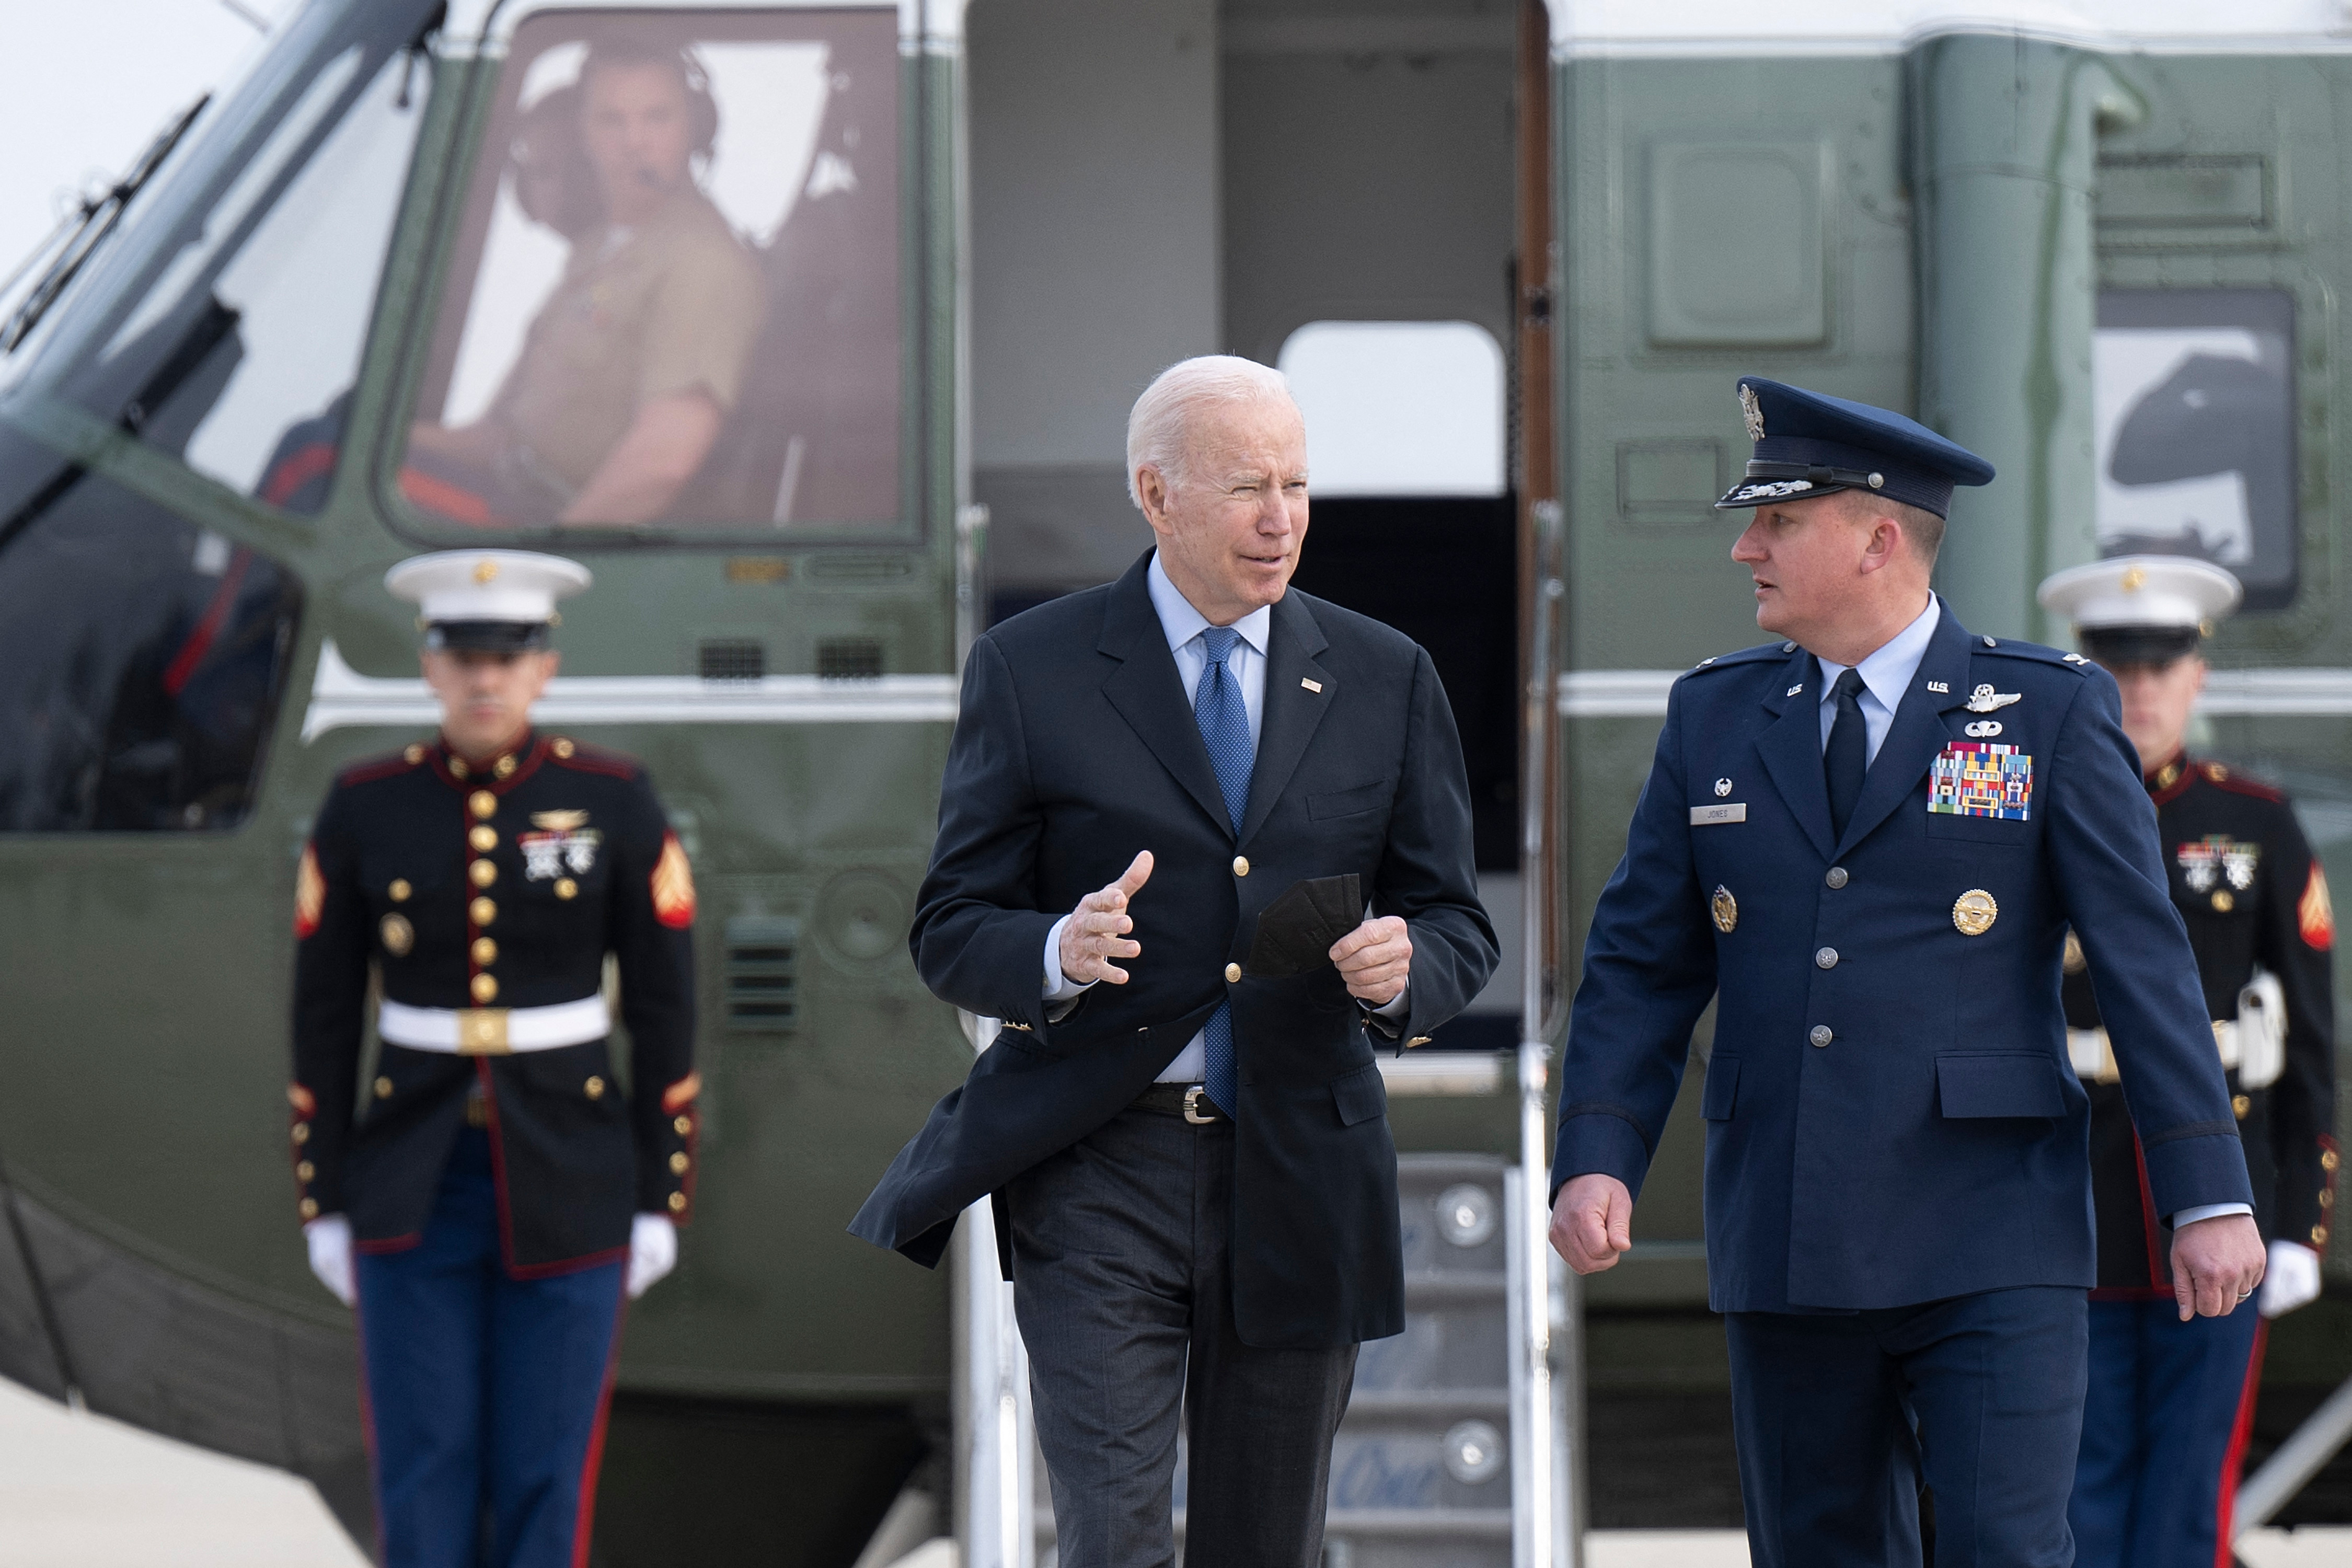 US President Joe Biden is greeted by Colonel Matthew Jones, Commander, 89th Airlift Wing, at Joint Base Andrews in Maryland, on March 23, before beginning a trip to Europe.